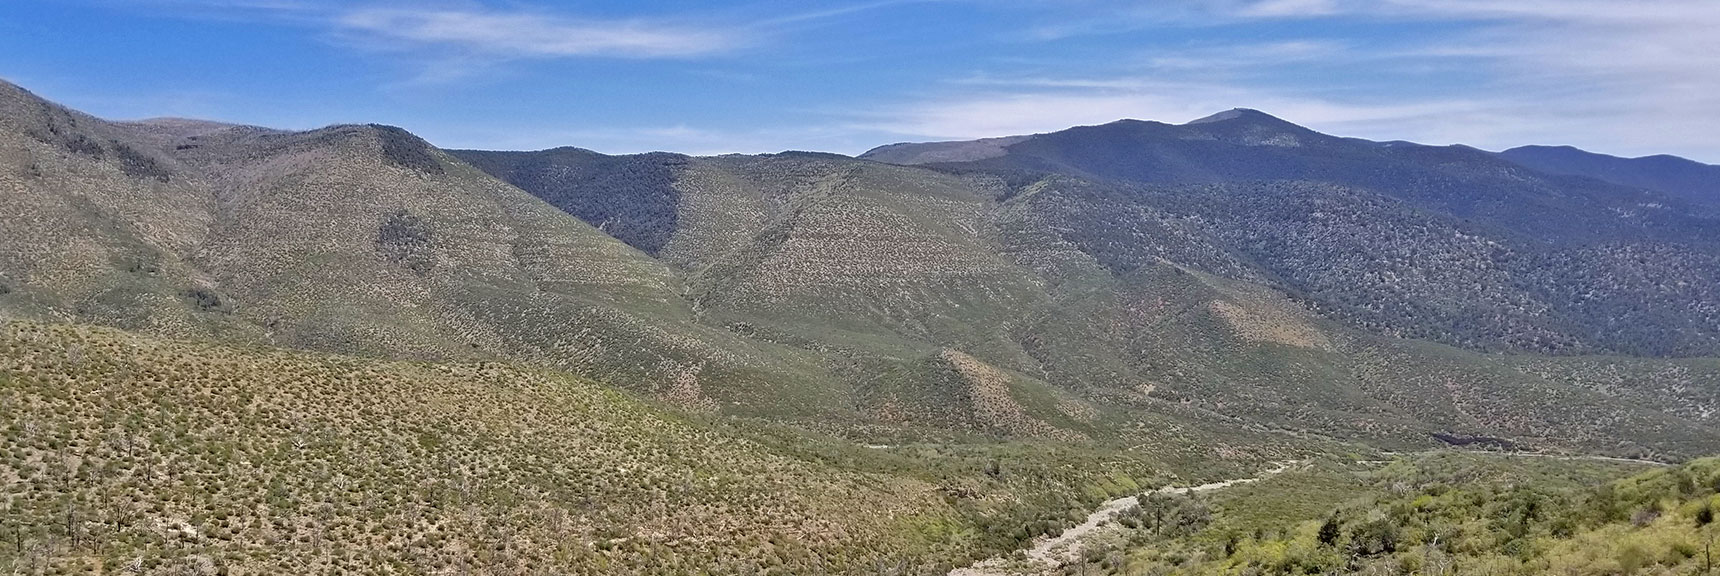 View Down Lovell Canyon from Griffith Shadow Trail, La Madre Mountains Wilderness, Nevada